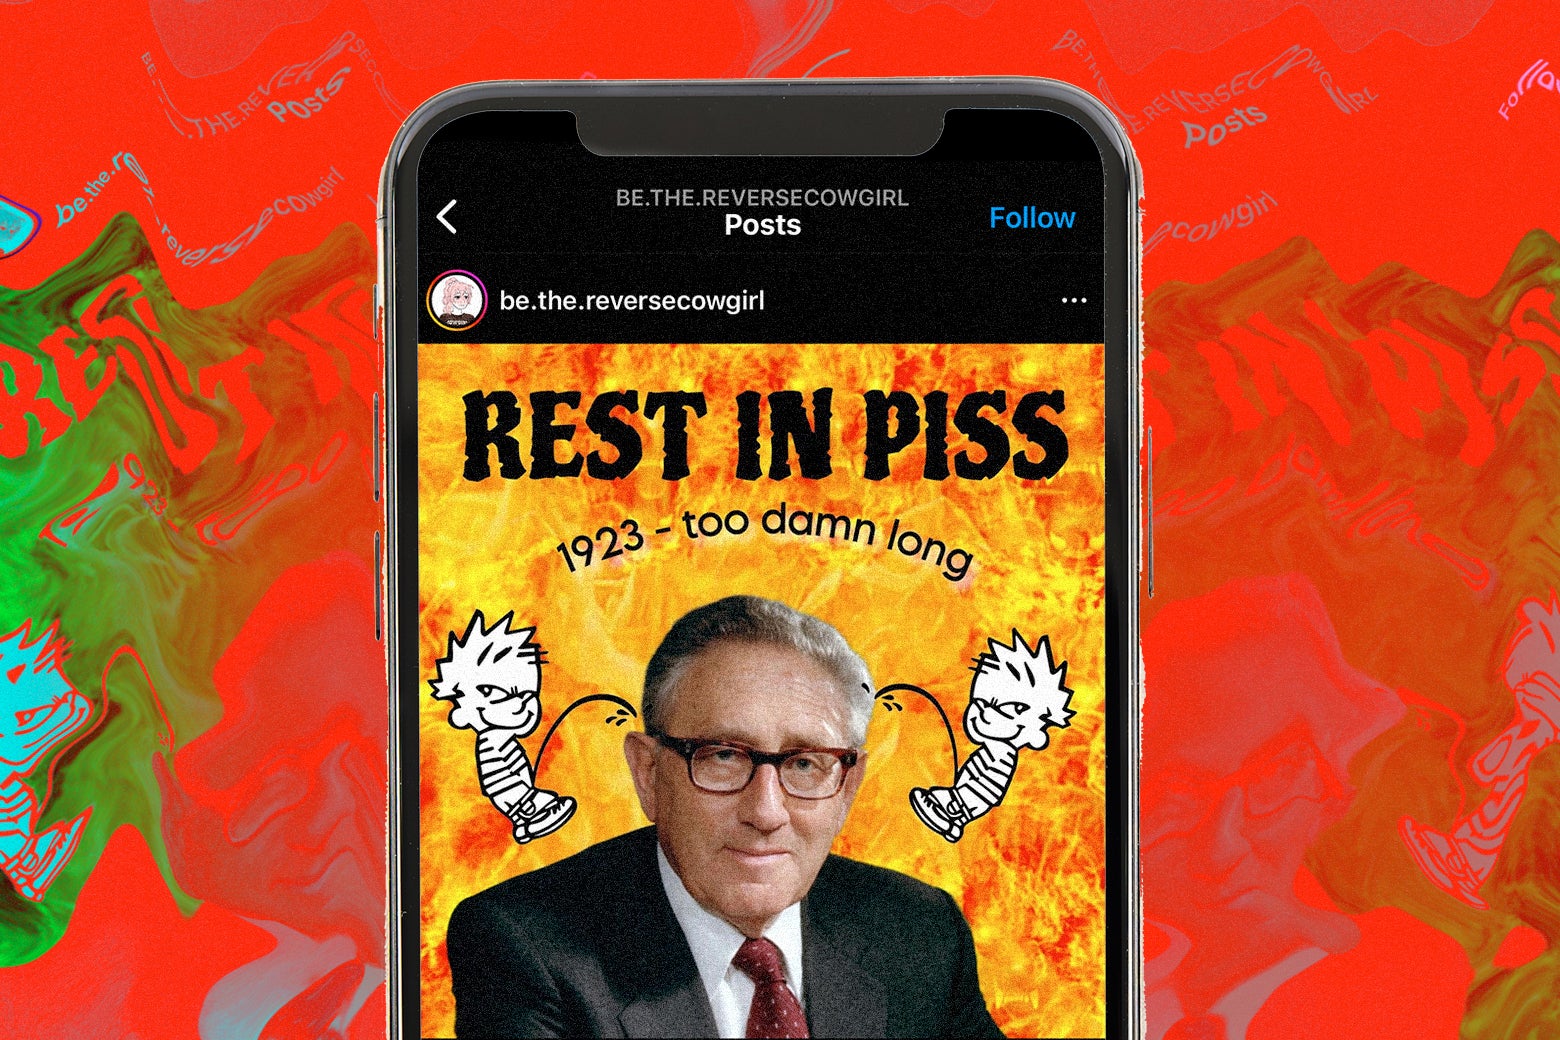 Henry Kissinger’s Evil Peaked In the 1970s. So Why Are Zoomers Dancing on His Grave?